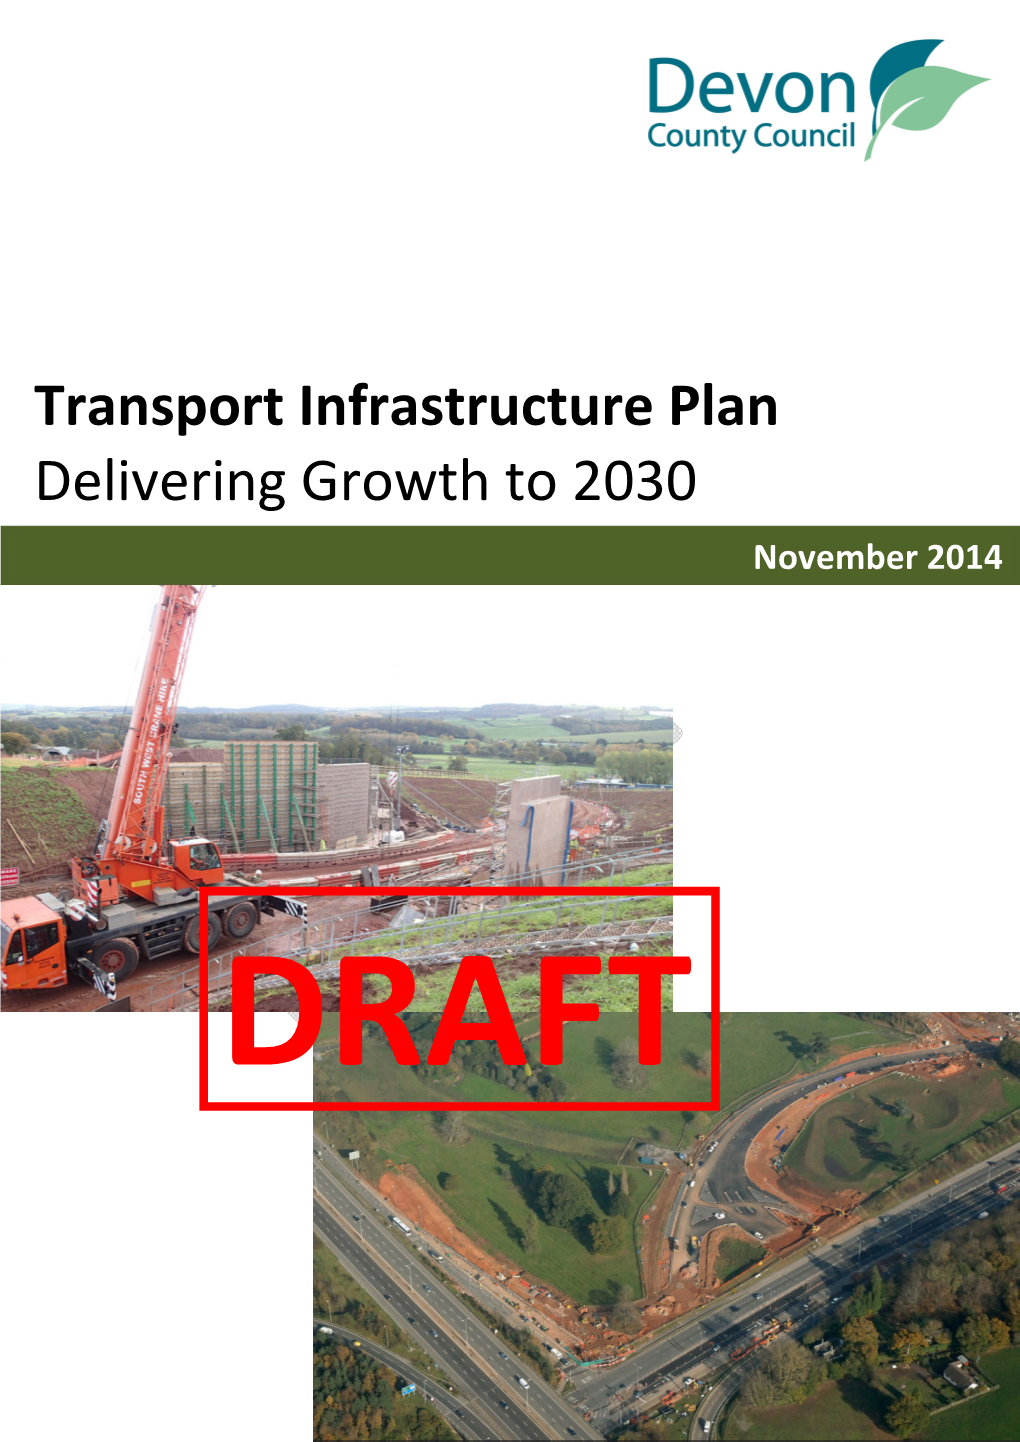 Transport Infrastructure Plan Delivering Growth to 2030